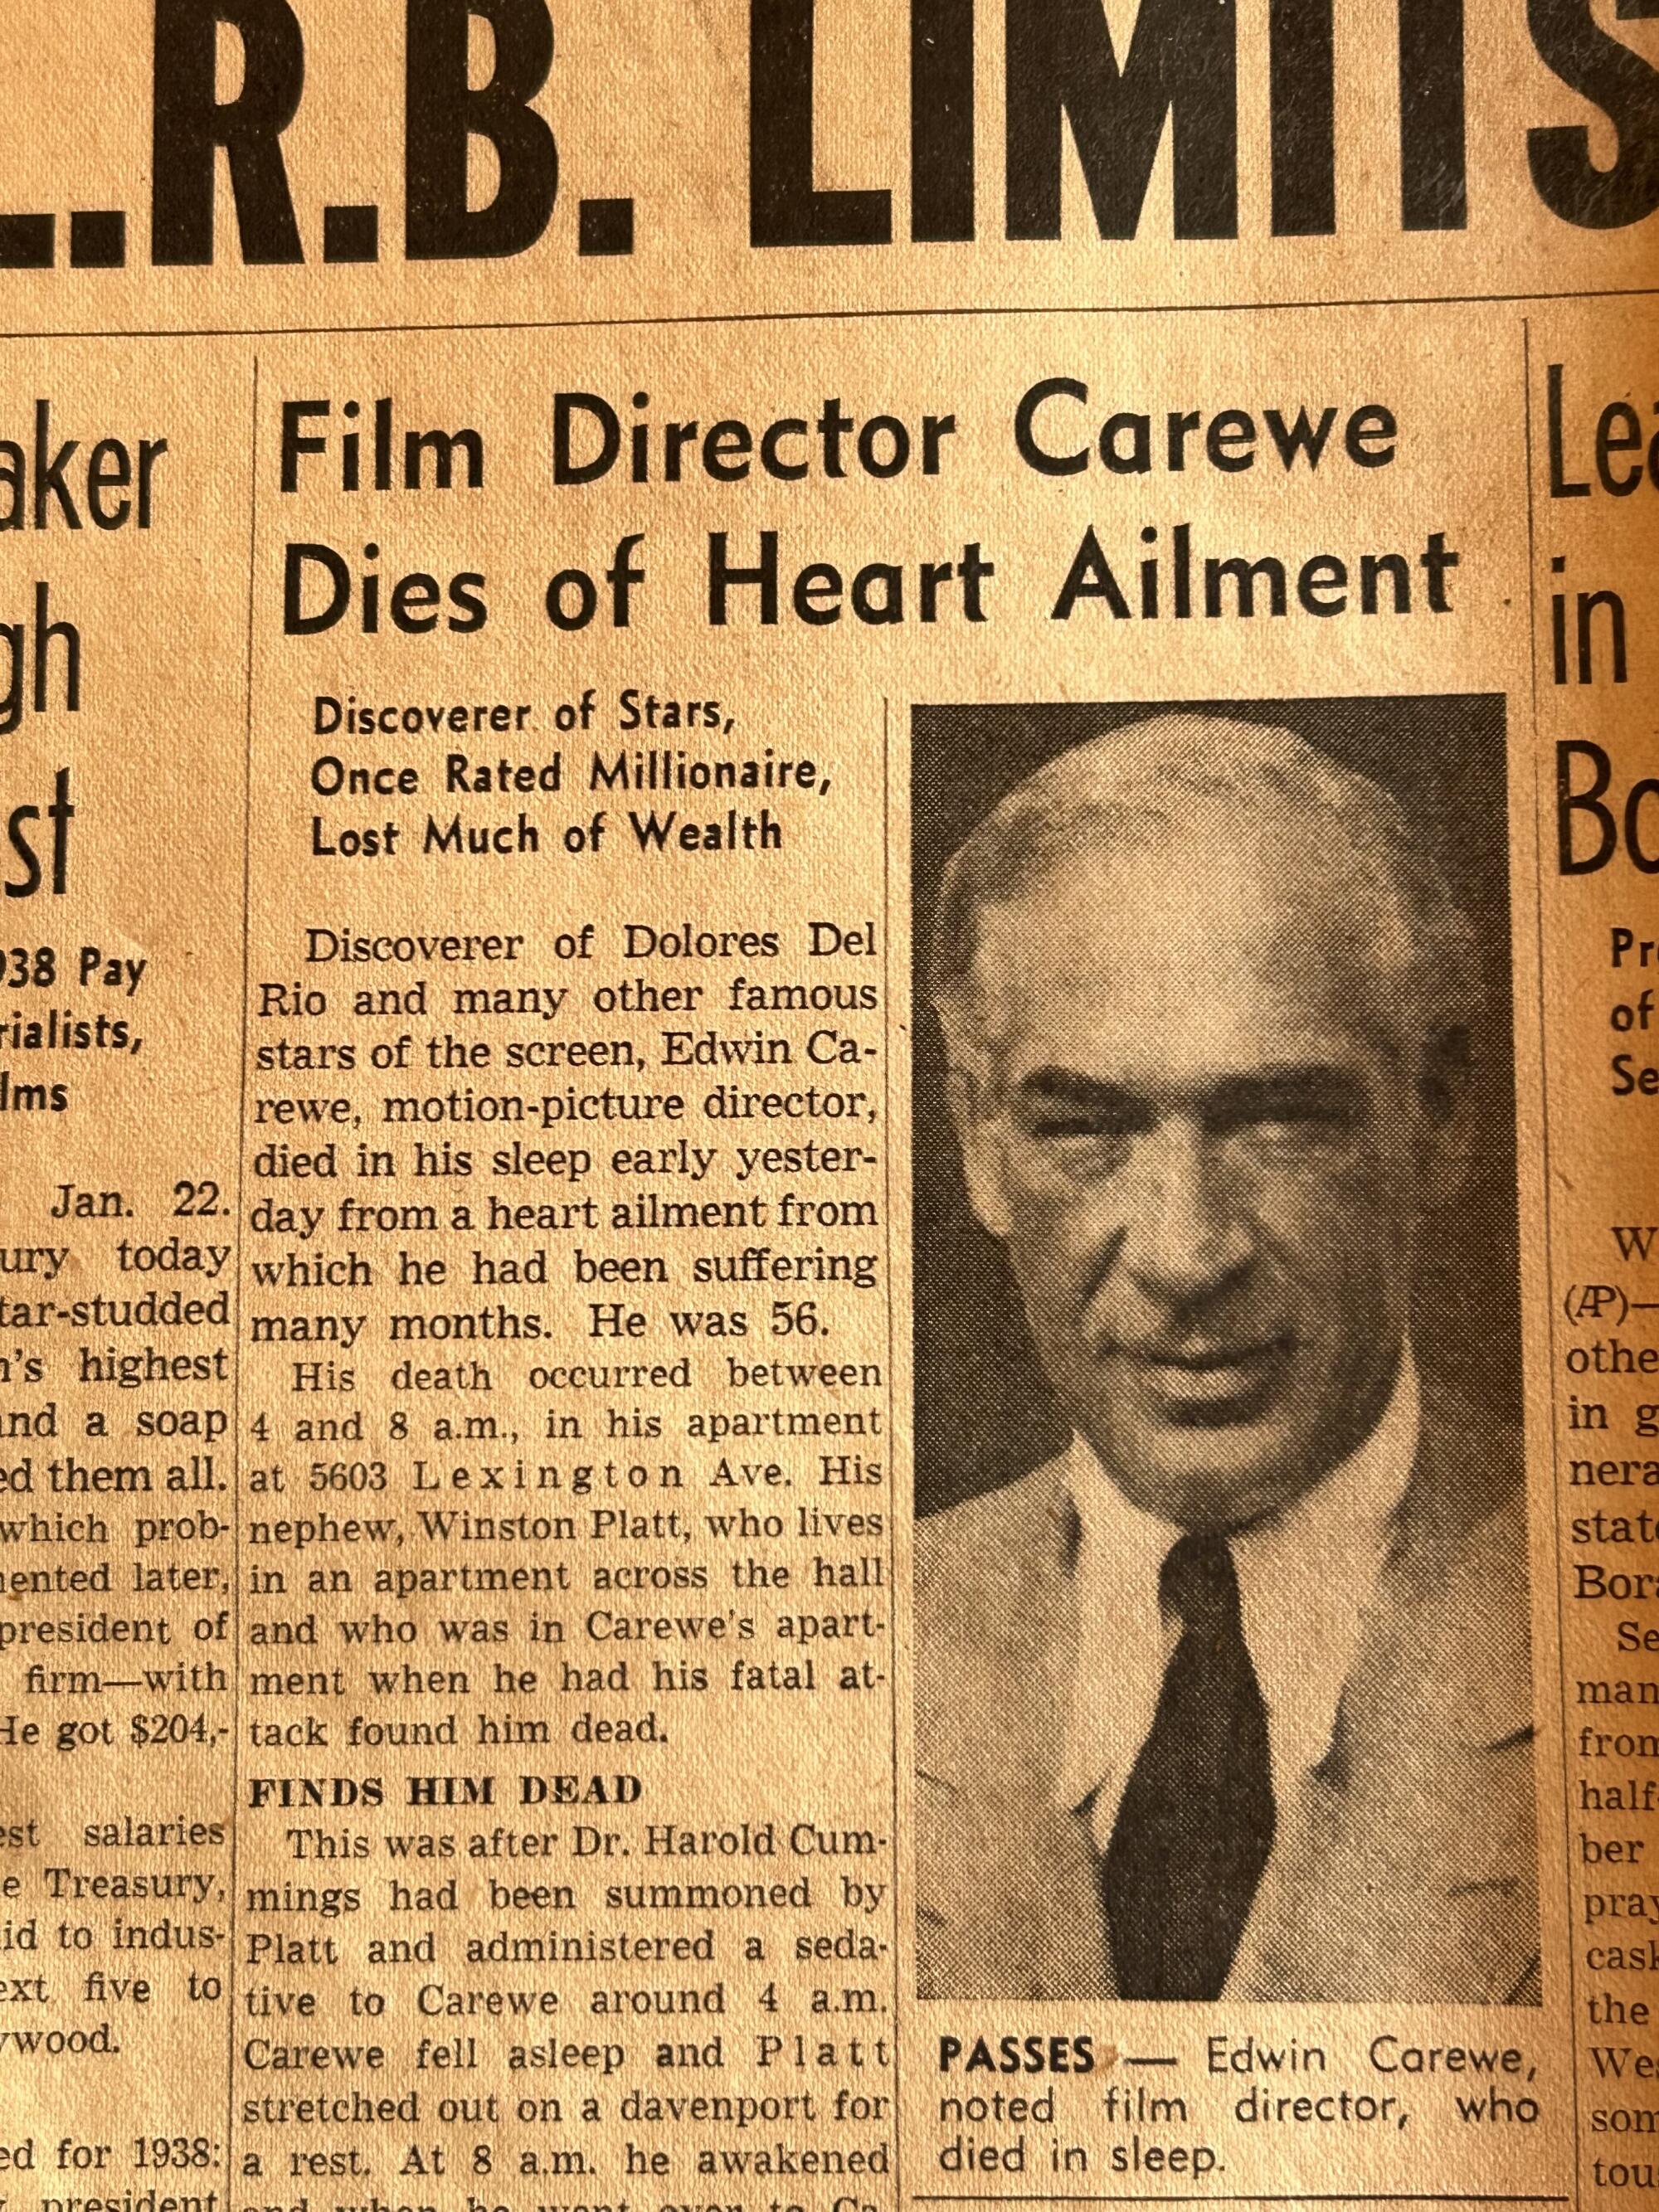 A newspaper clipping with the headline "Film director Carewe dies of heart ailment" and a man's photo